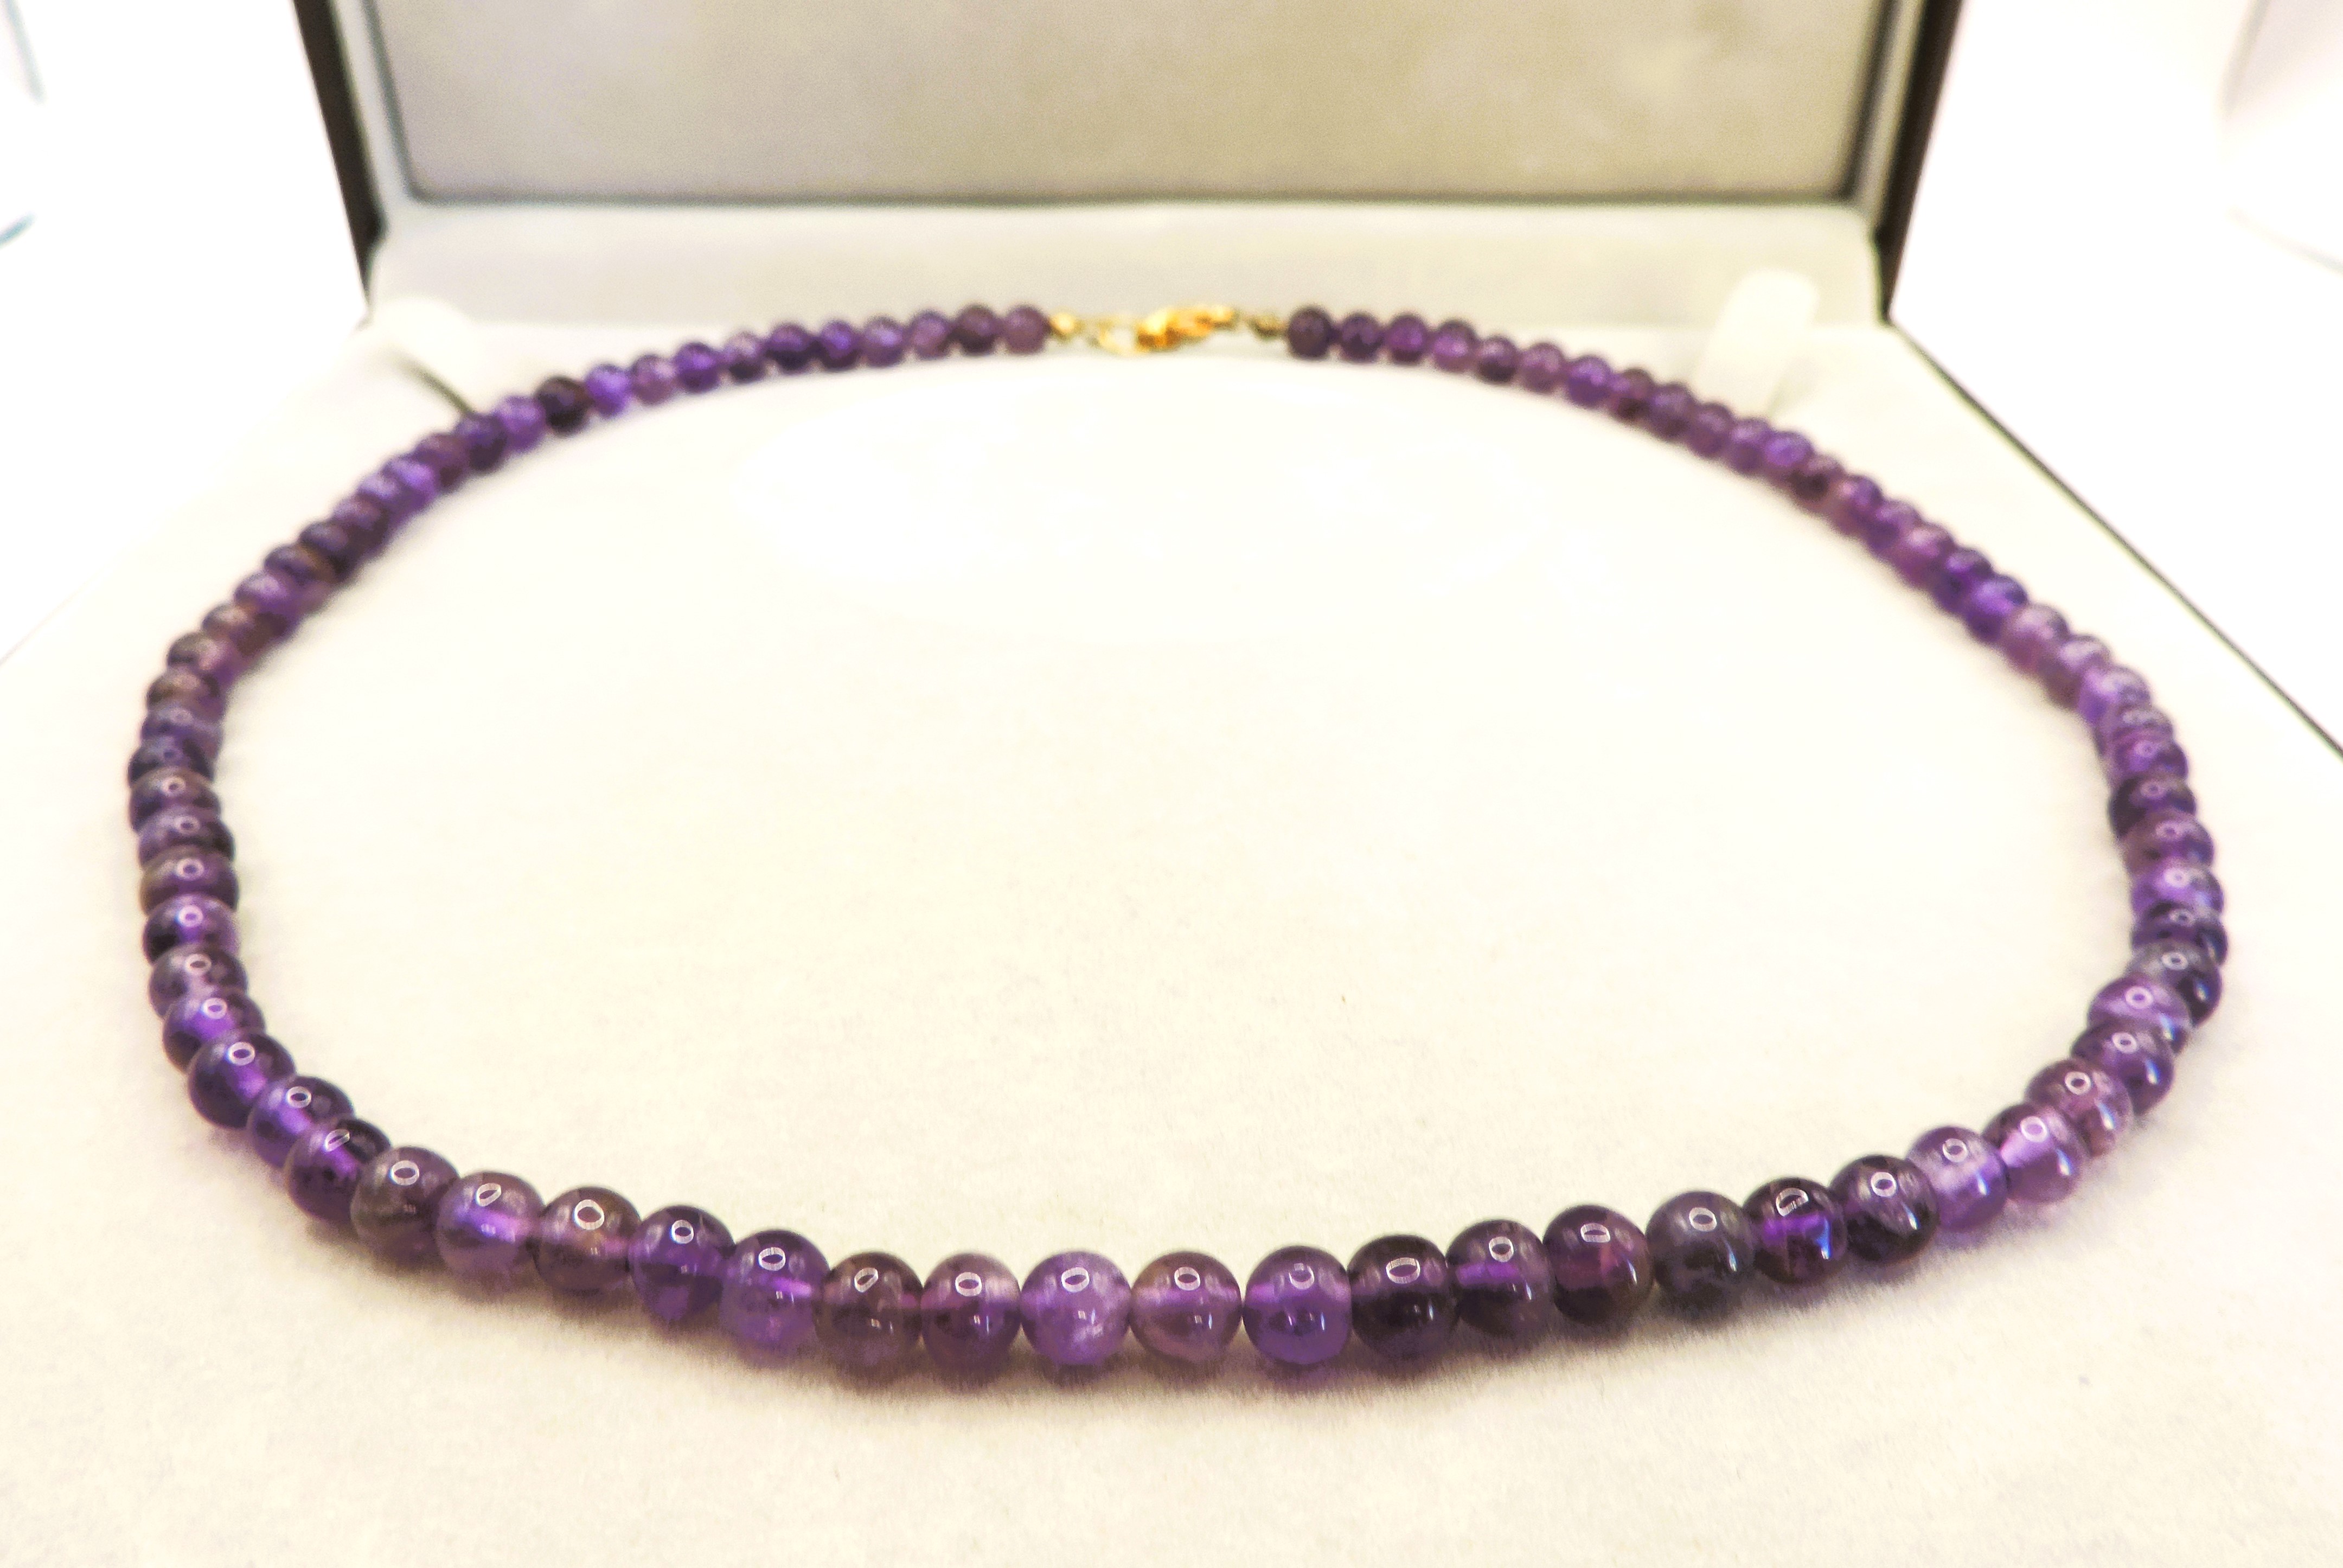 18 inch Amethyst Bead Necklace With Gift Box